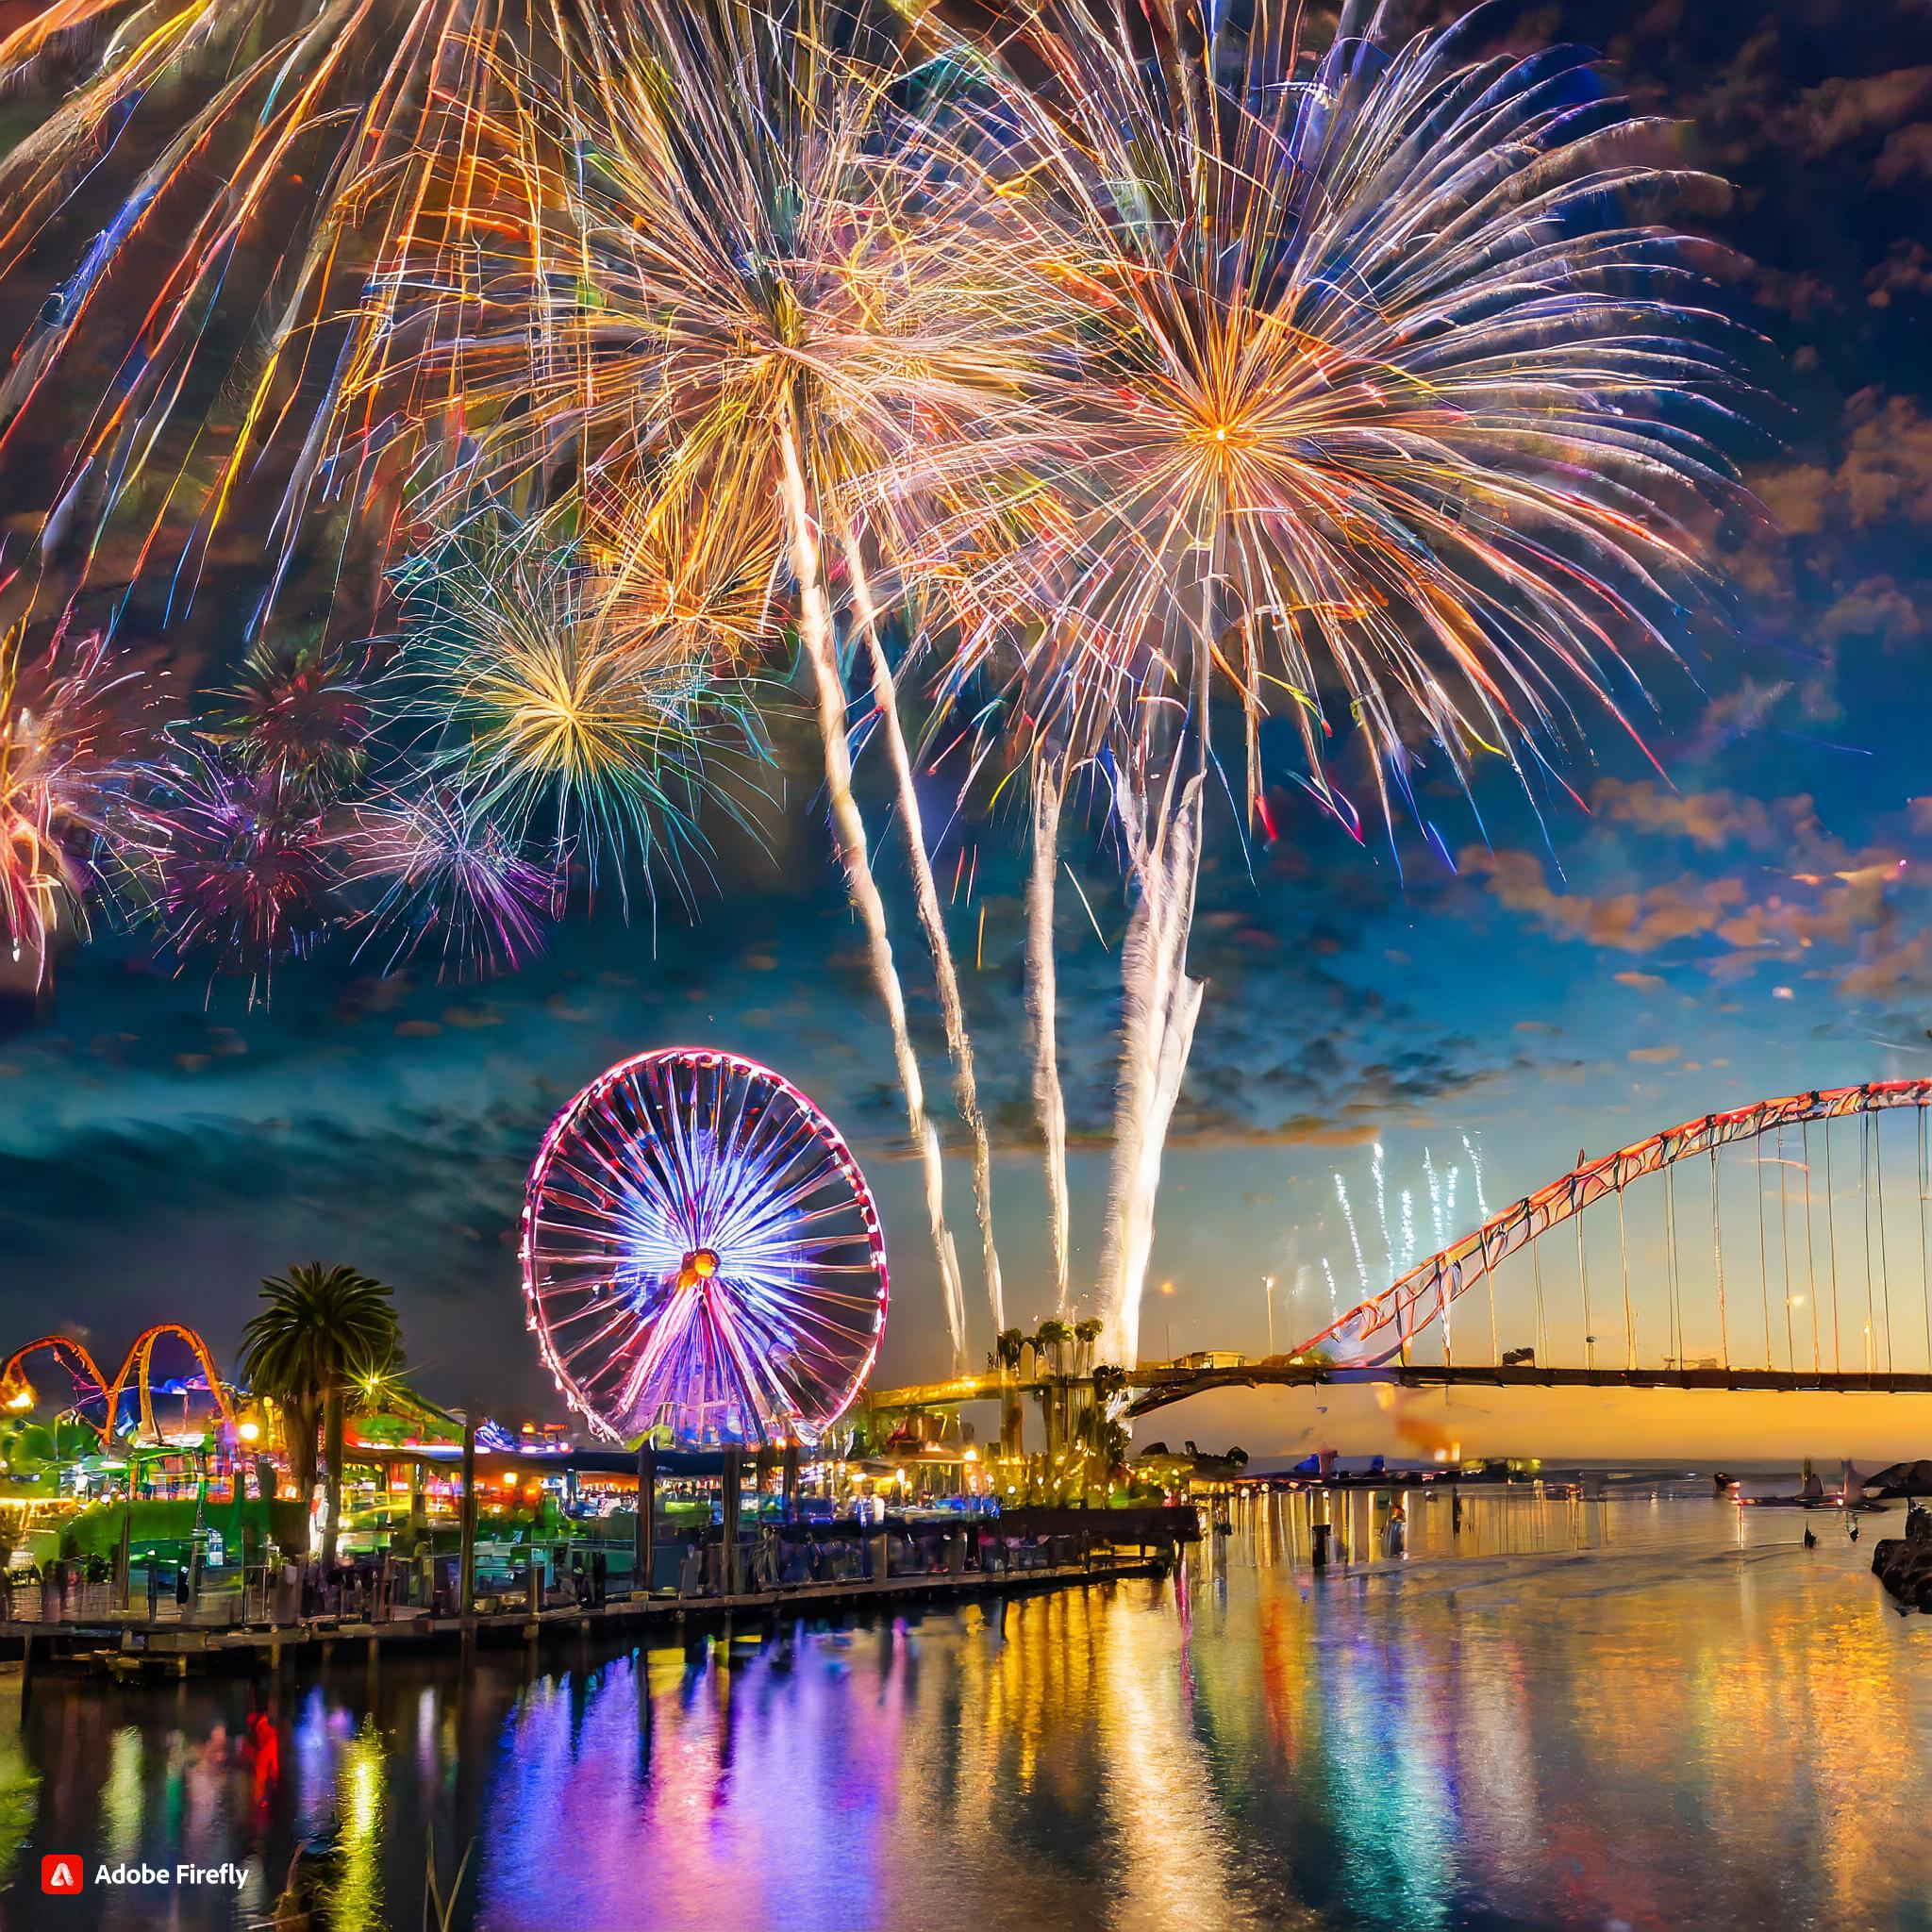 Firefly California. Night sky with fireworks, beautifully lit, amusement park, rollercoaster